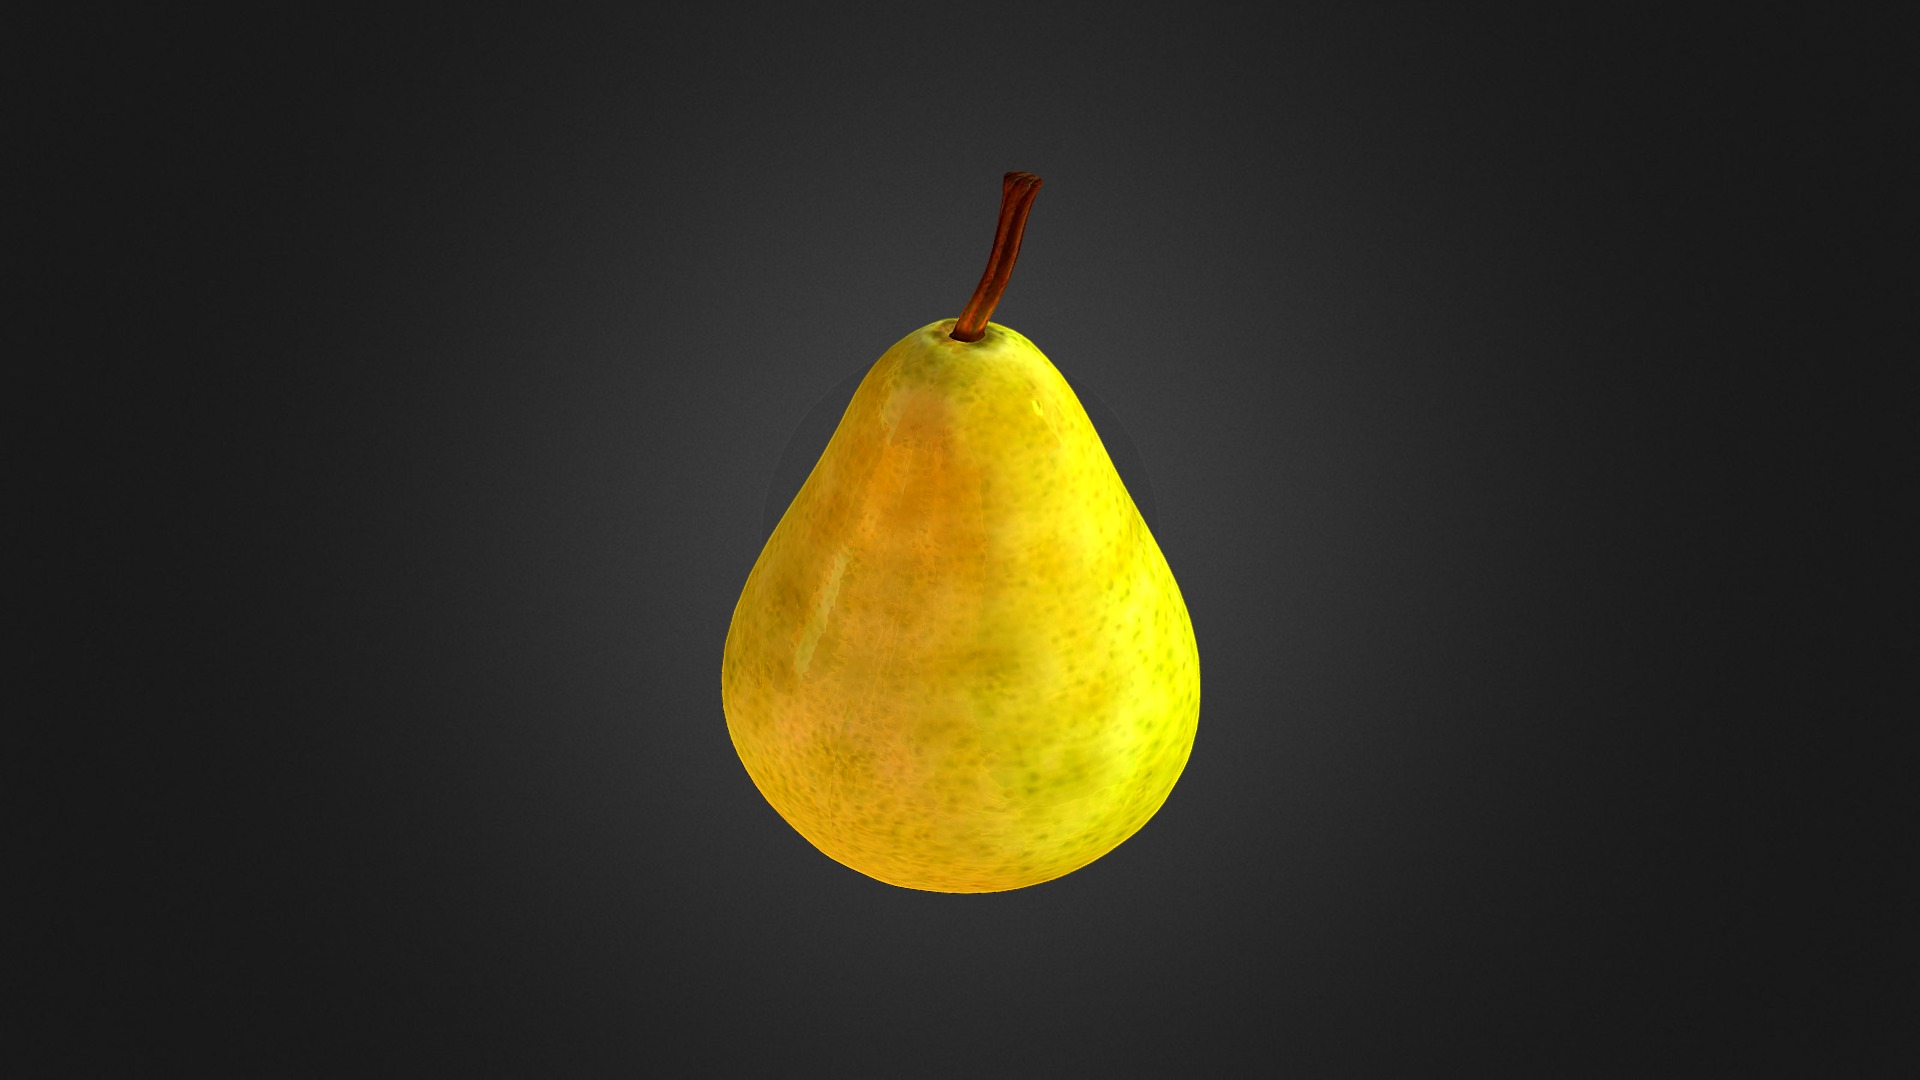 3D model Pear - This is a 3D model of the Pear. The 3D model is about a yellow pear with a stem.